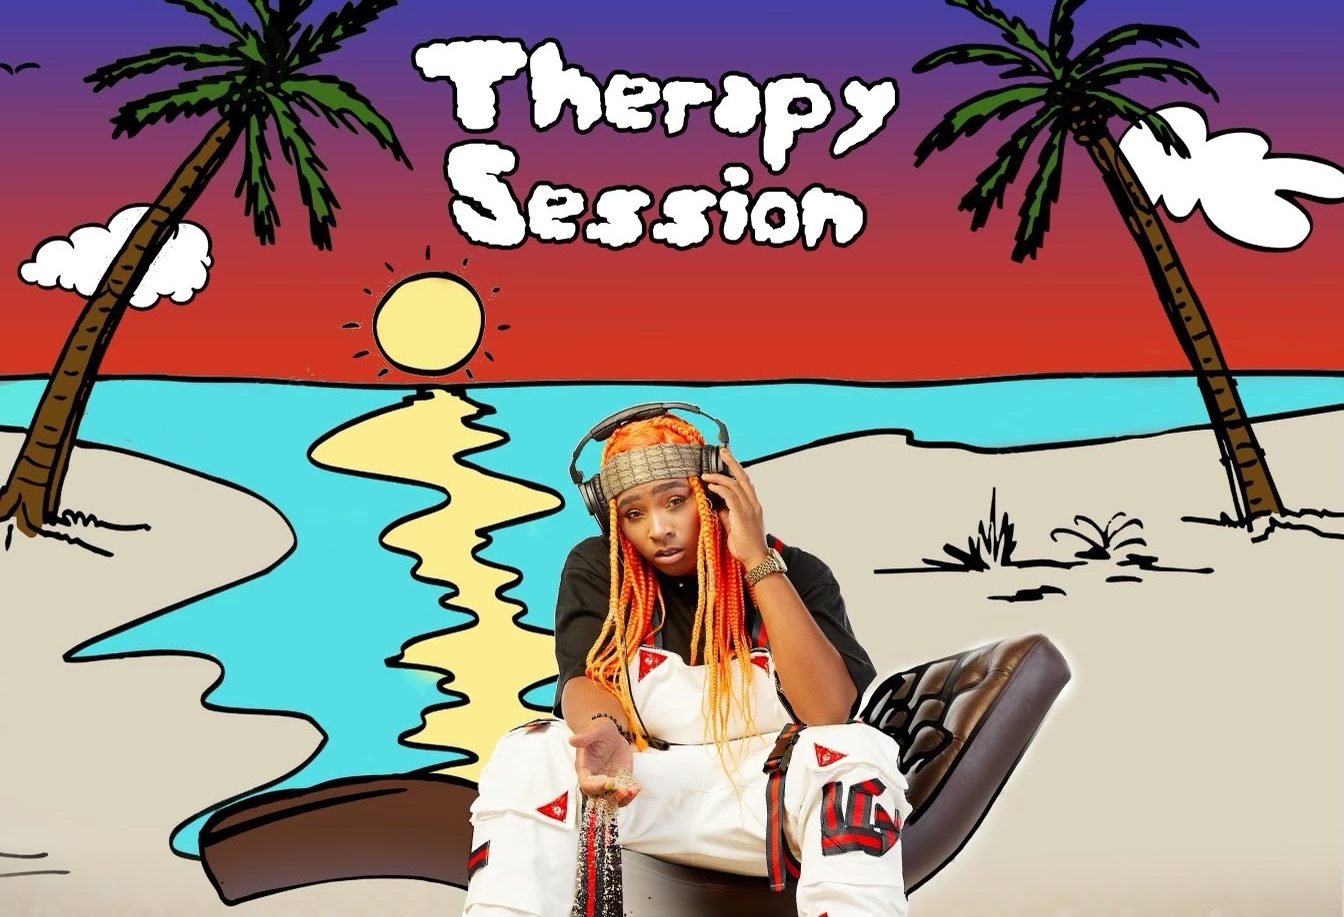 Philly’s Very Own LG (Team Genius) Embraces Black Roots And Femininity In Debut Rap Album, ‘Therapy Session’